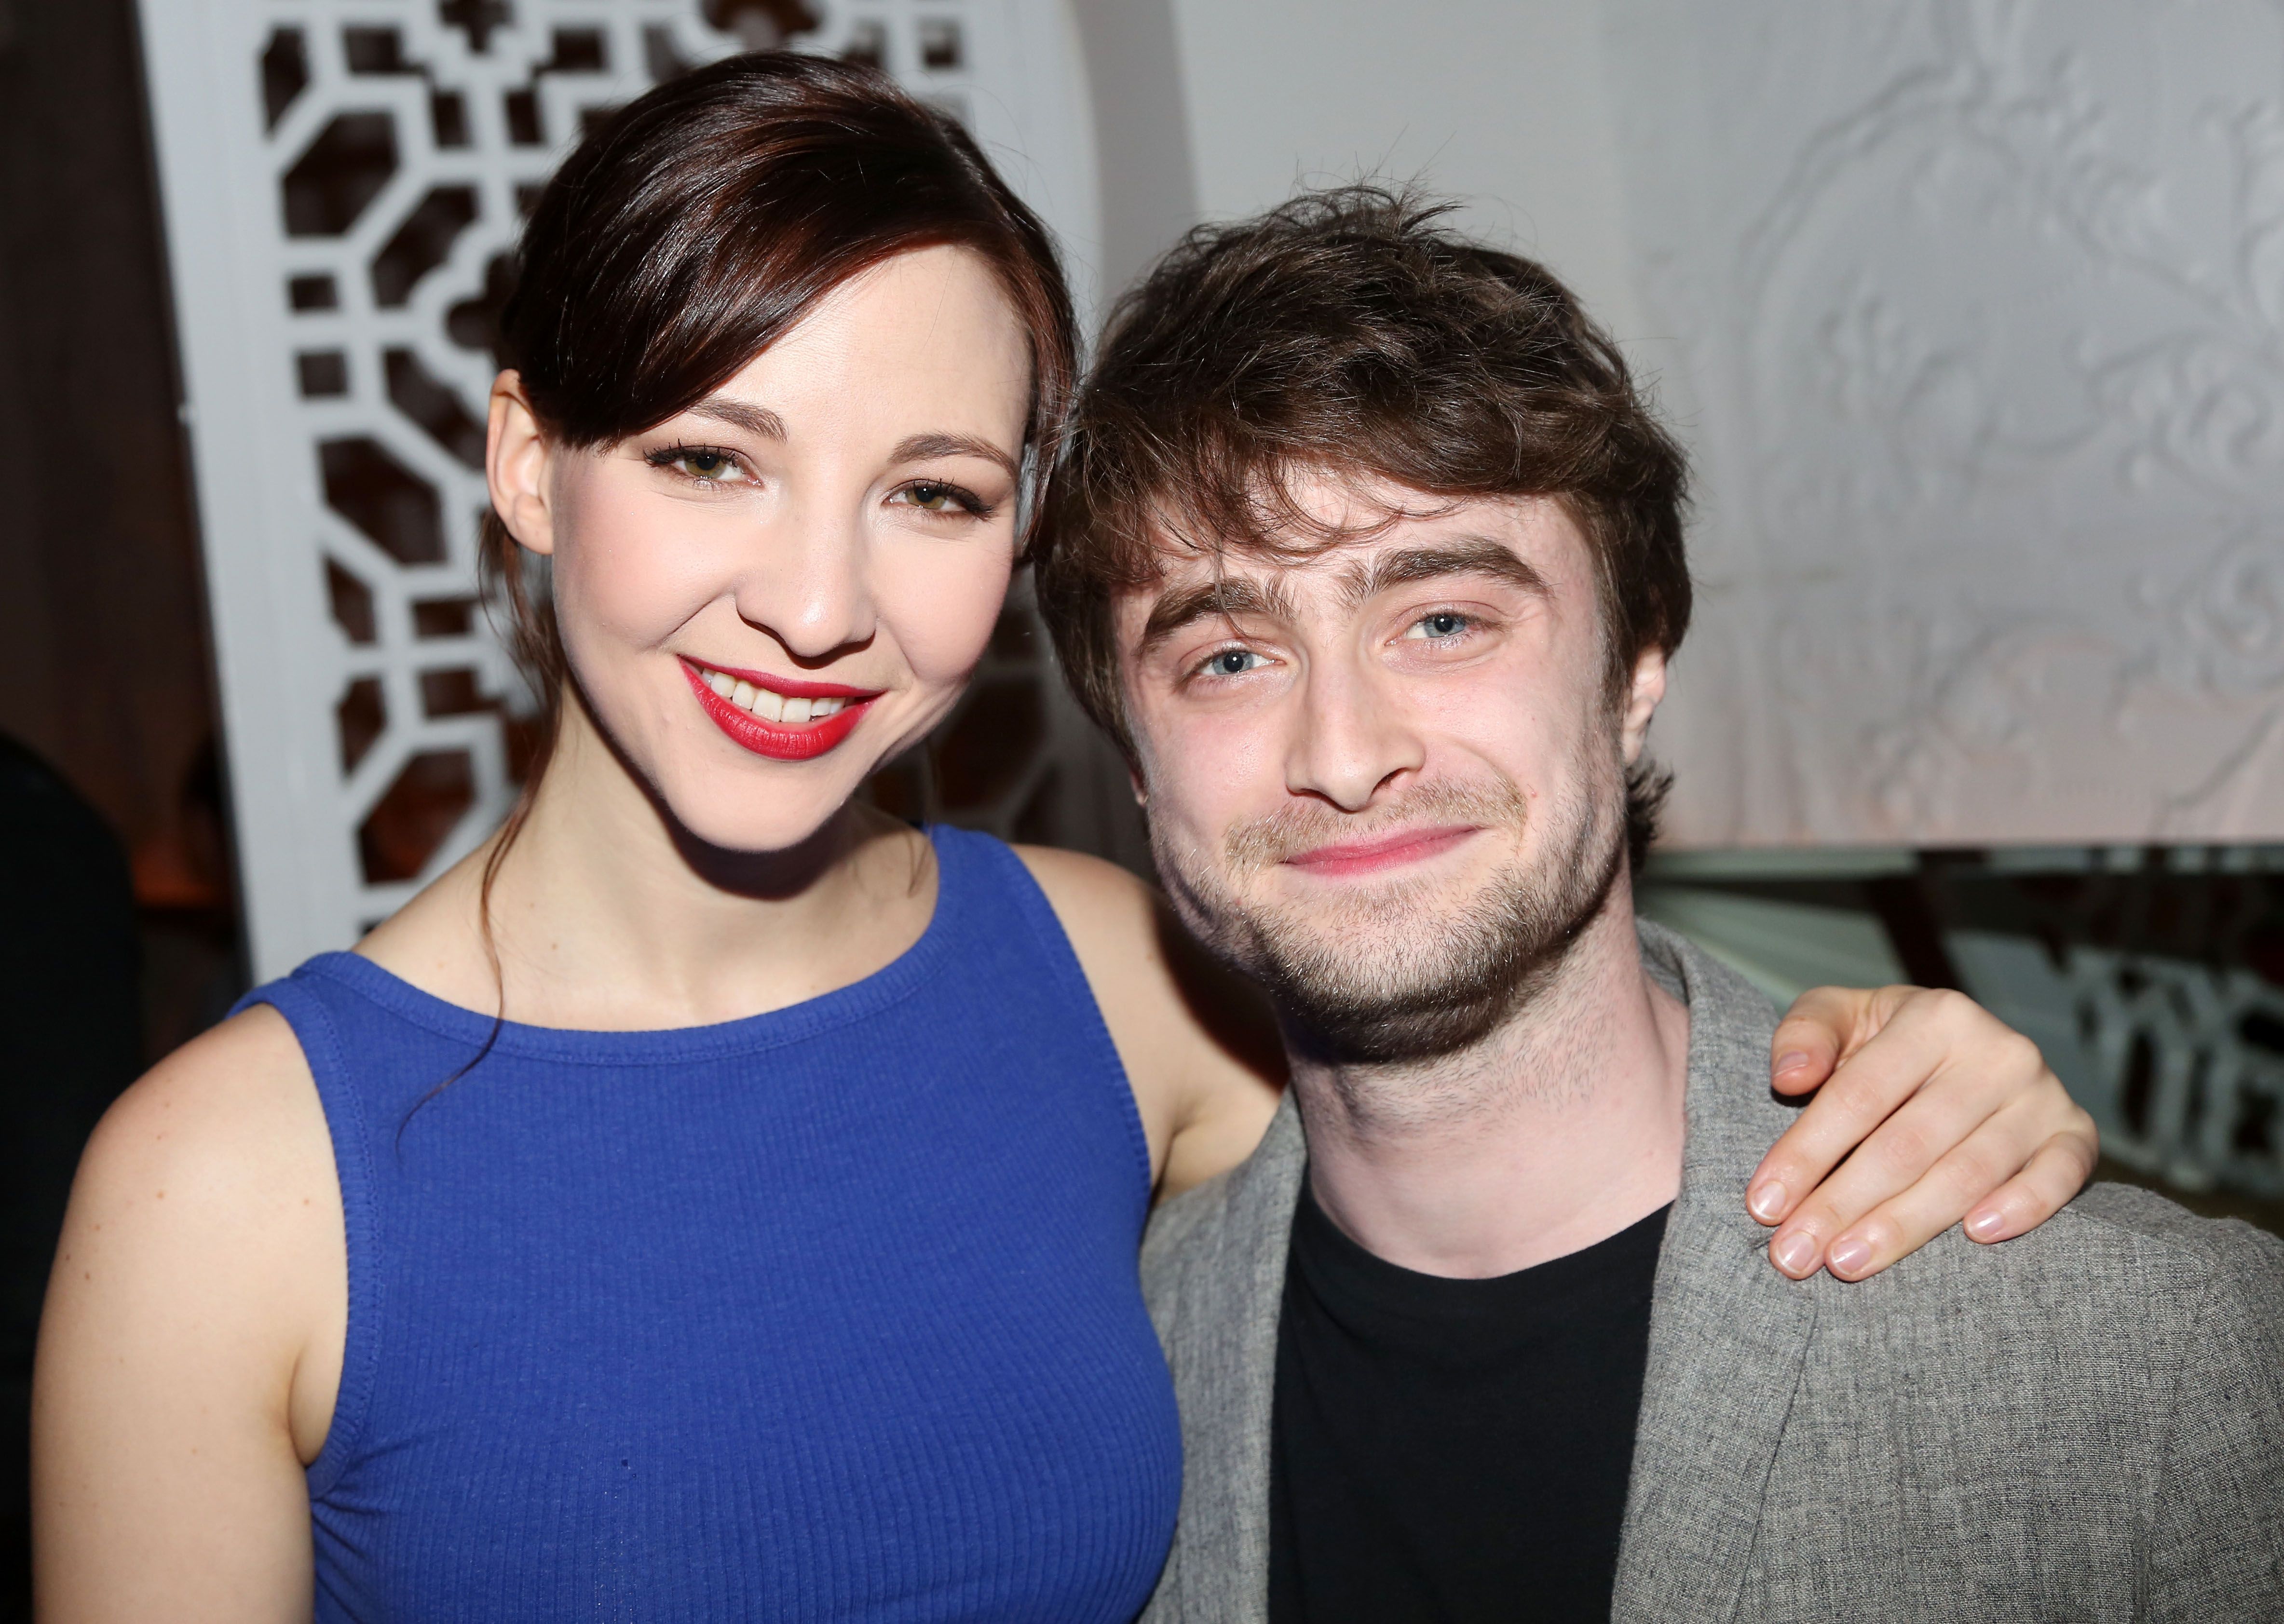 Daniel Radcliffe and Erin Darke on the opening night of the play "The Spoils" in 2015 in New York City | Source: Getty Images